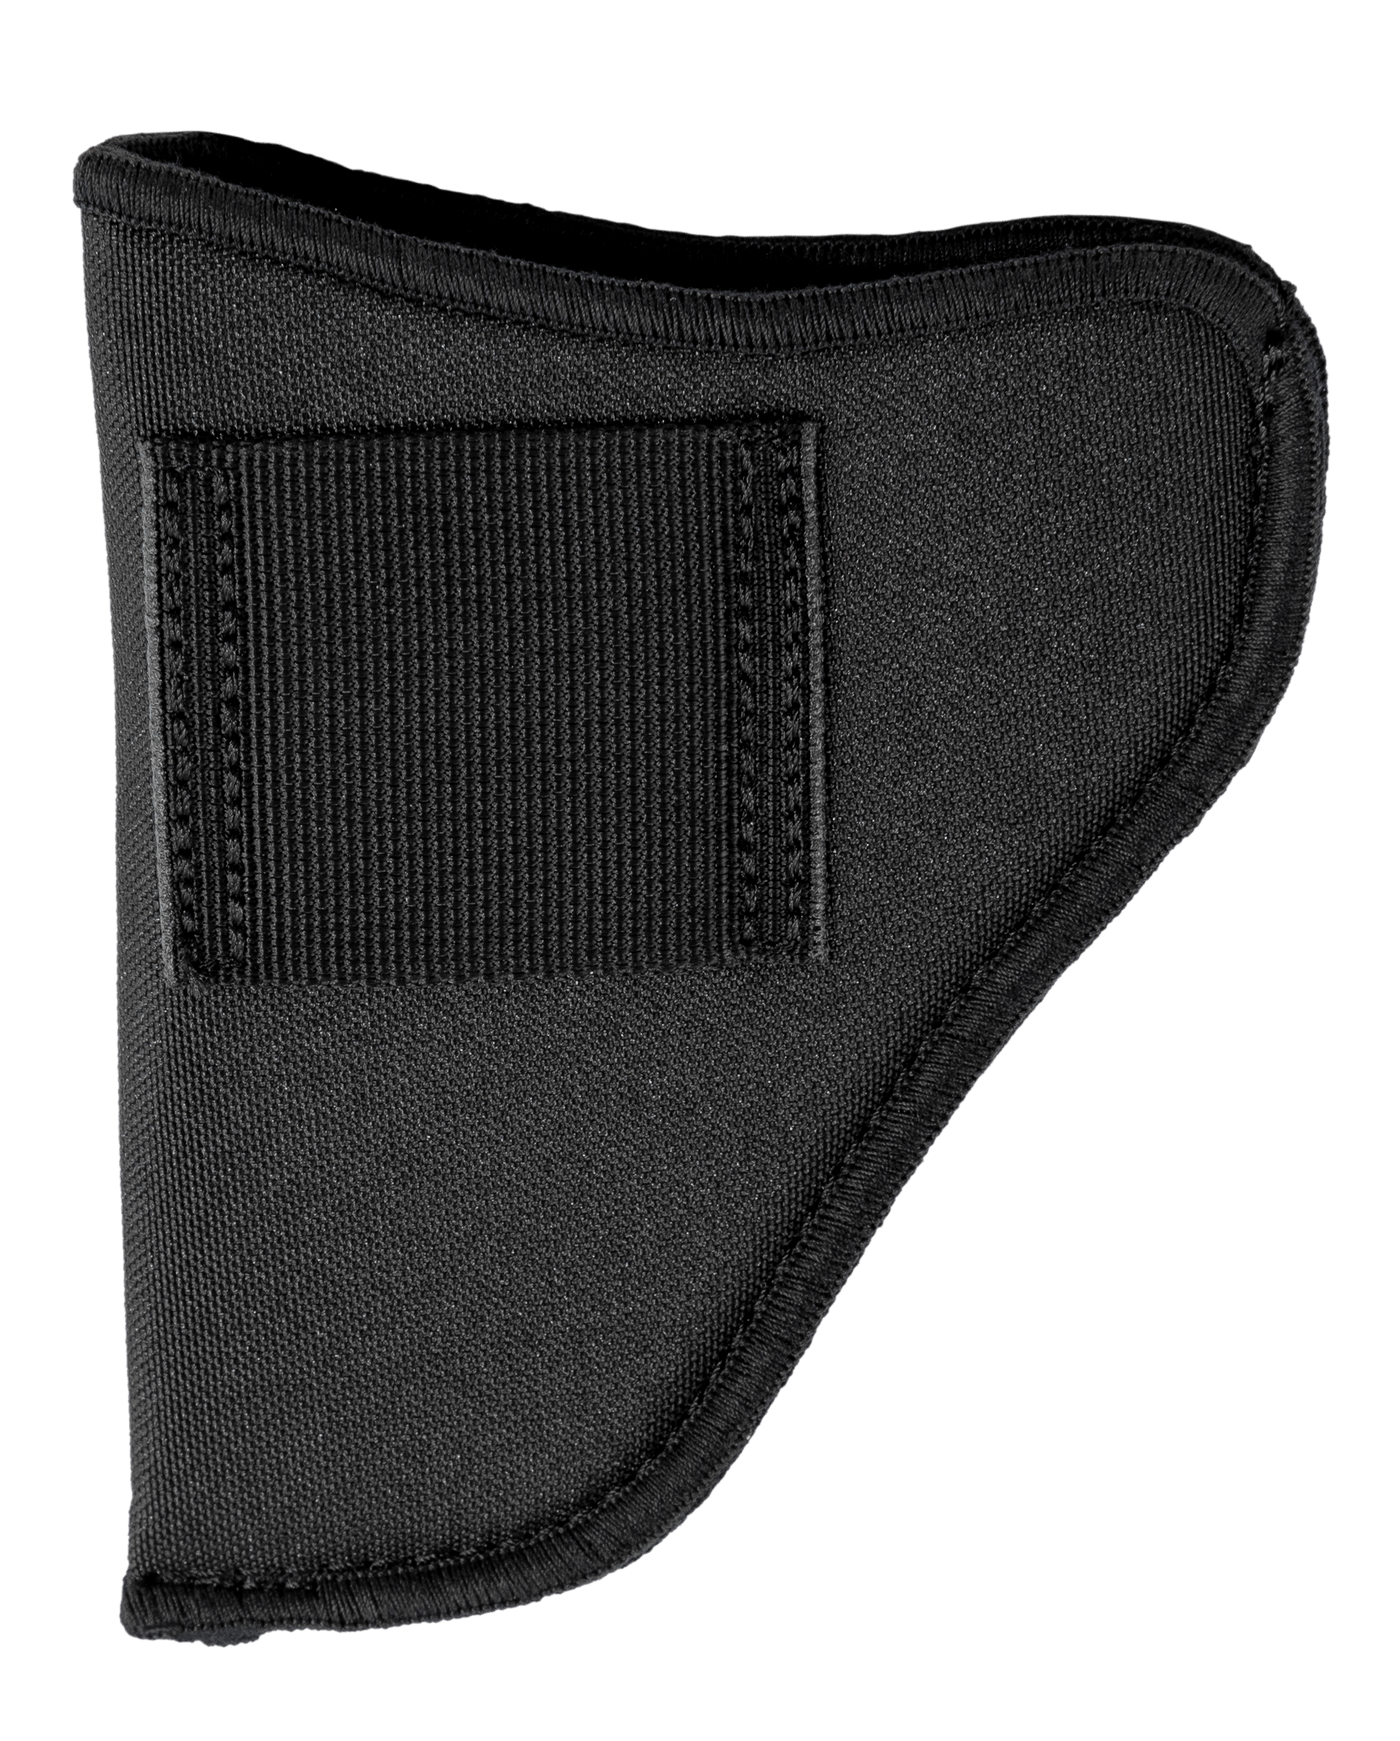 GunMate Gunmate Itp Holster Rh #10 - Large Autos To 4" Black Holsters And Related Items